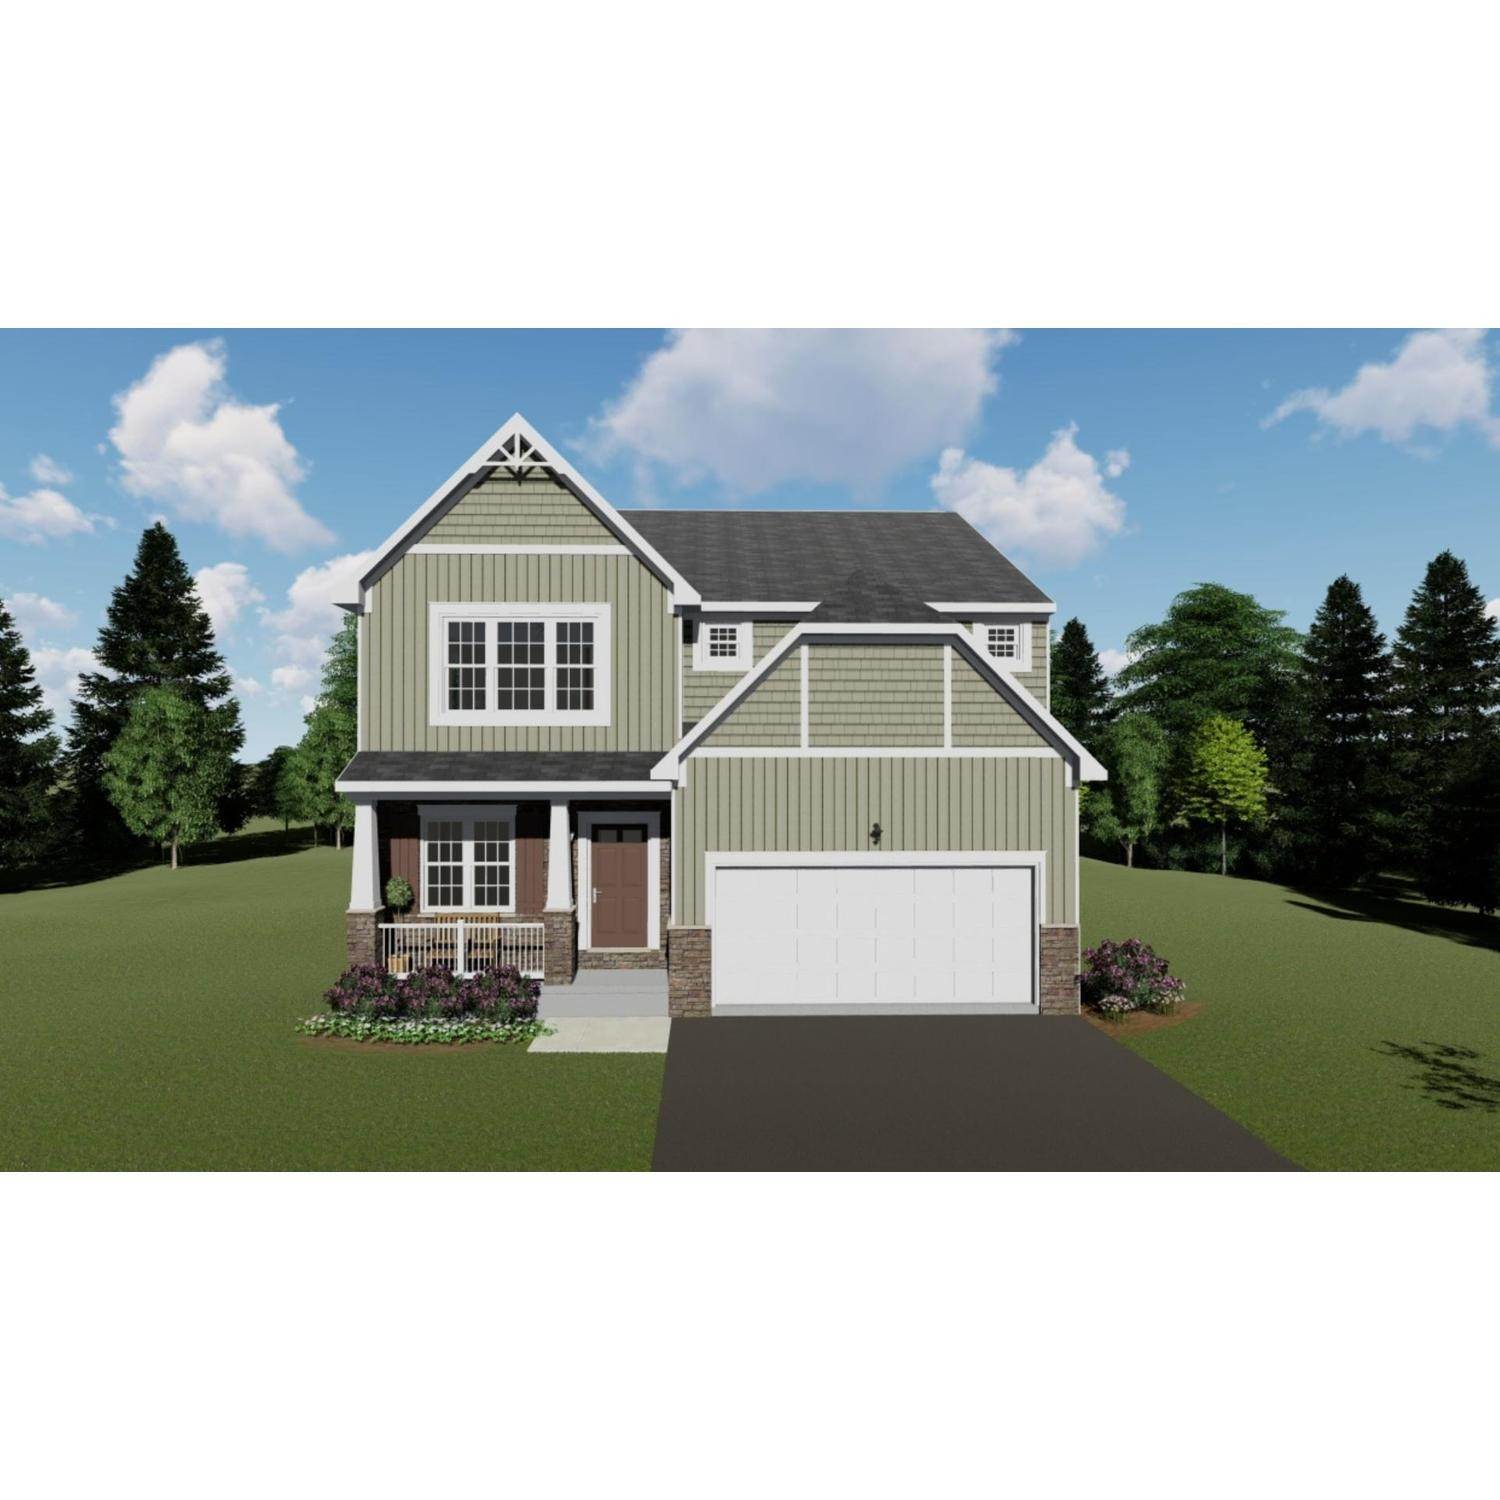 Single Family for Sale at Pataskala, OH 43062